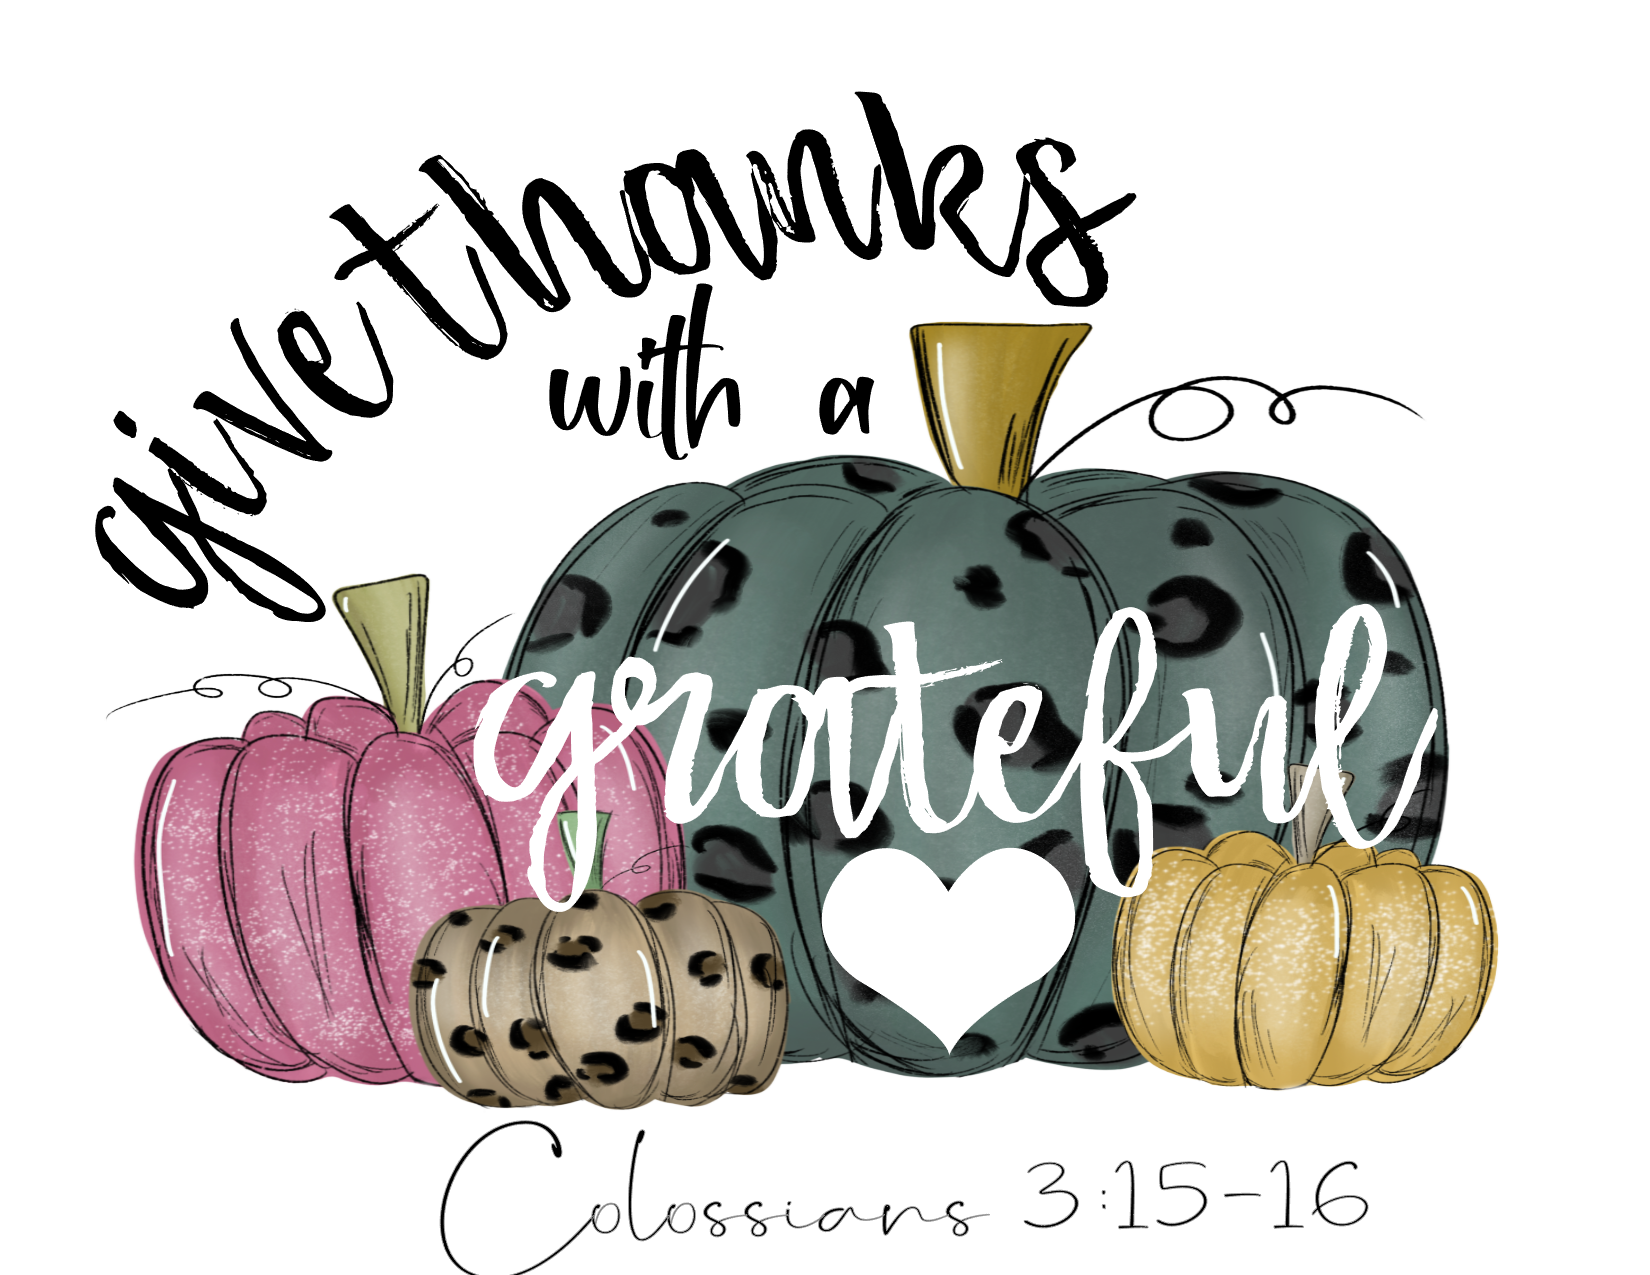 #66 Give Thanks with a grateful heart Colossians 3:15-16